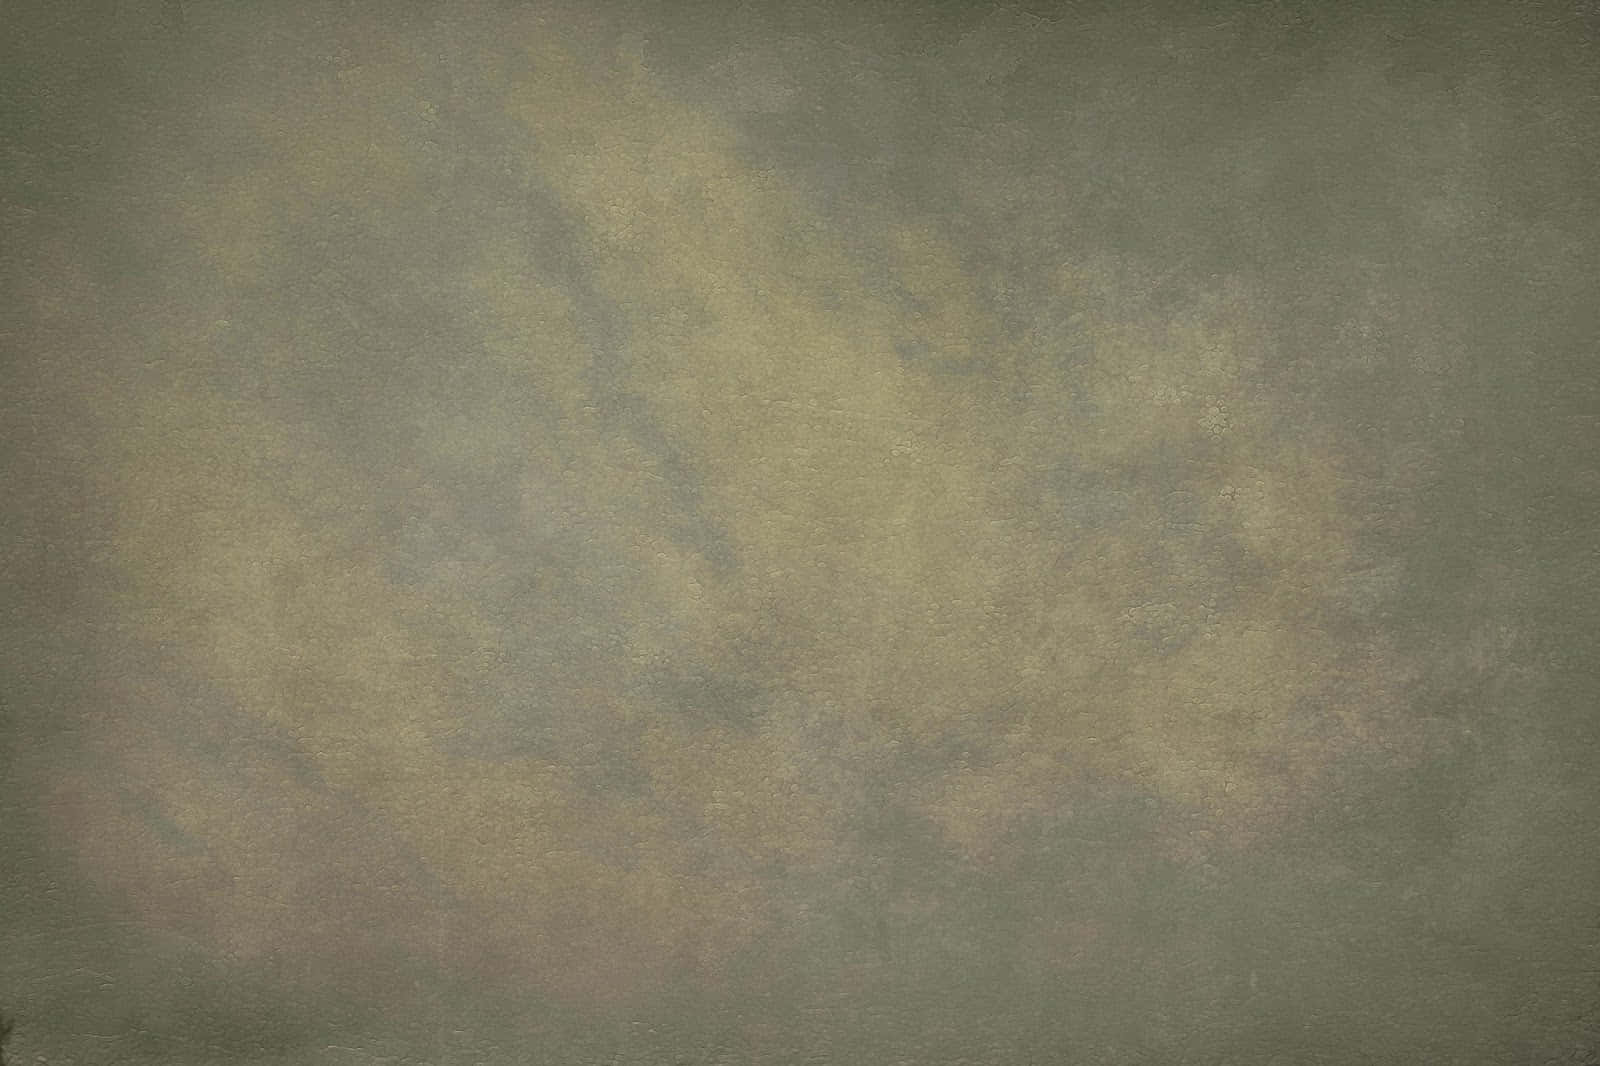 A Photo Of A Gray And Yellow Background